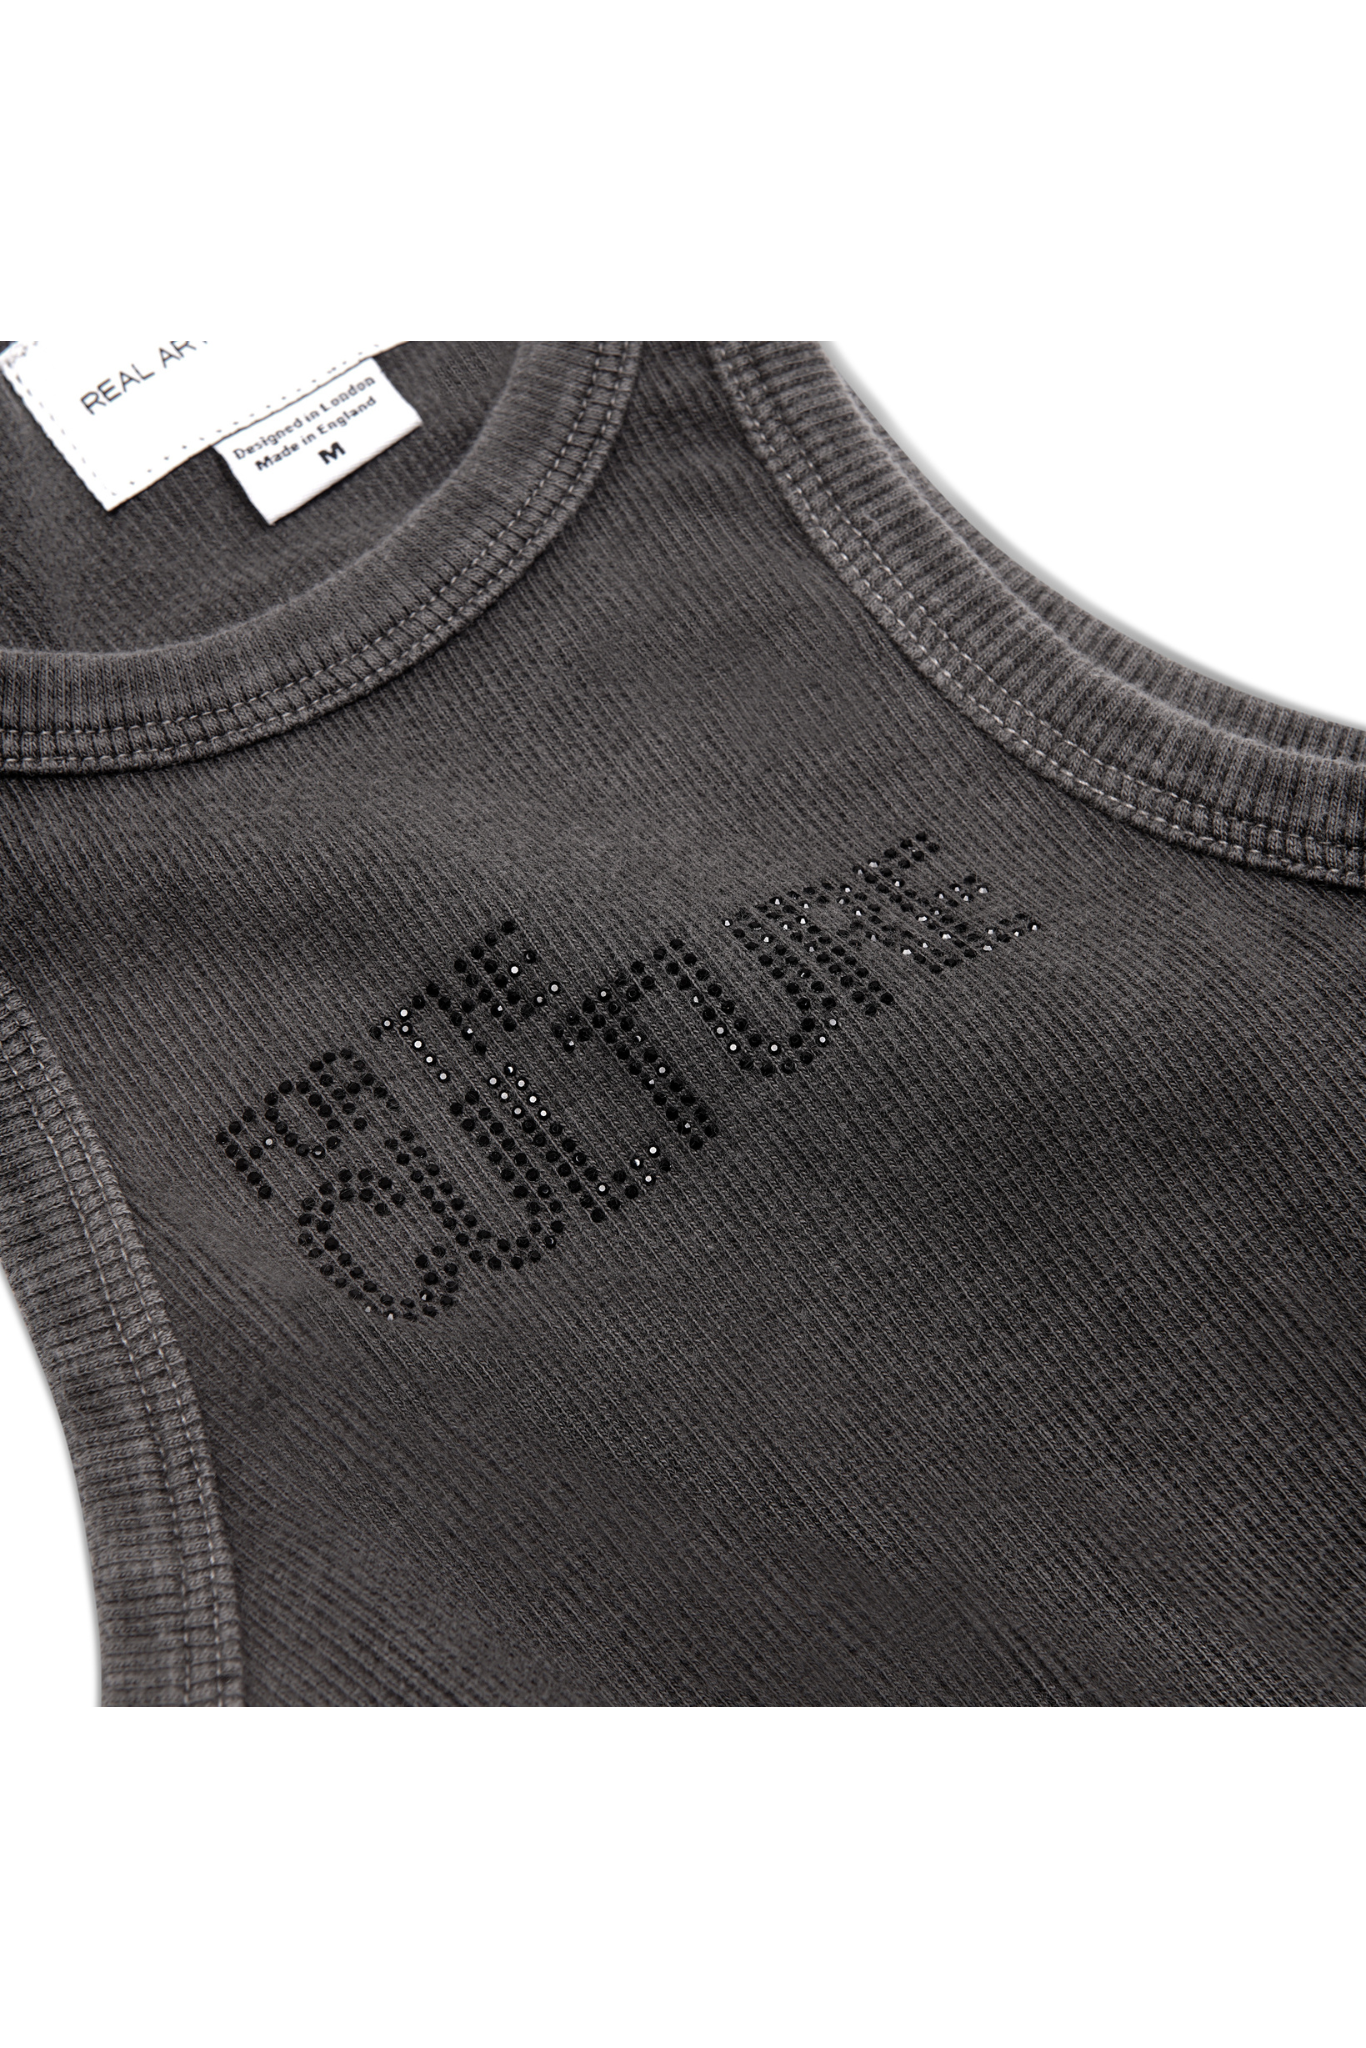 For The Culture Crystal Tank Top - Charcoal Grey